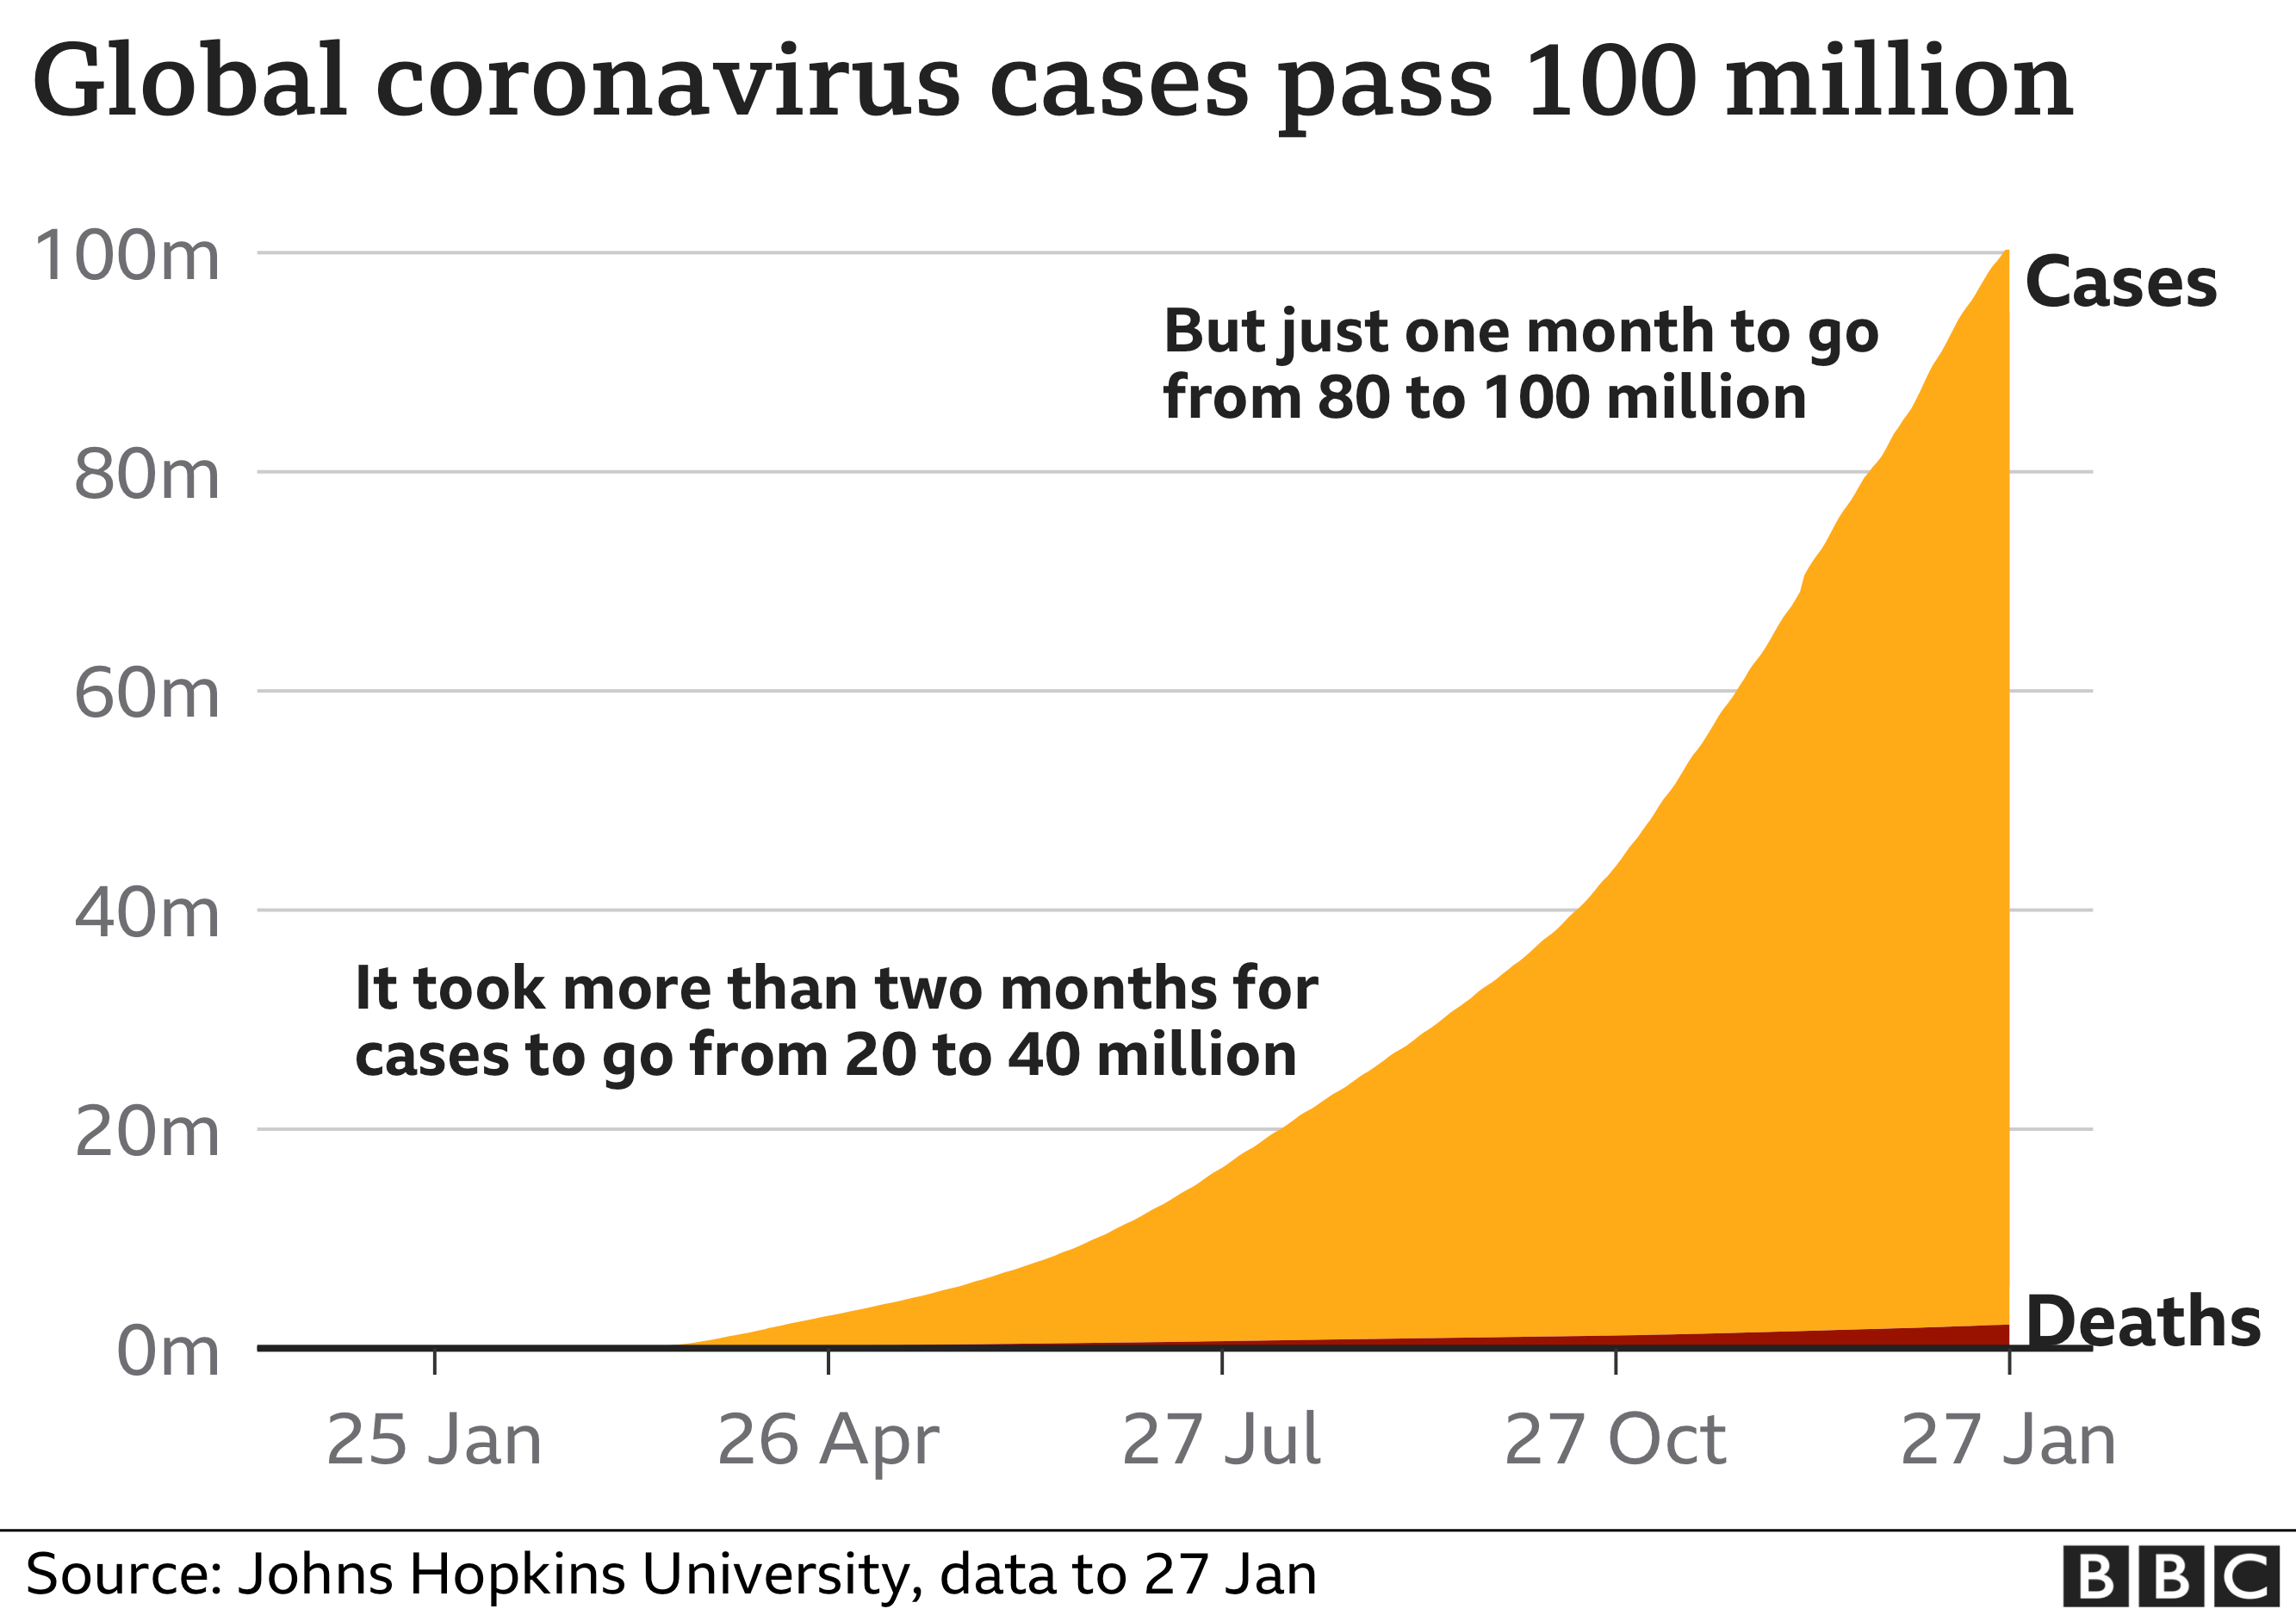 Chart showing how the number of global coronavirus cases has risen in recent months